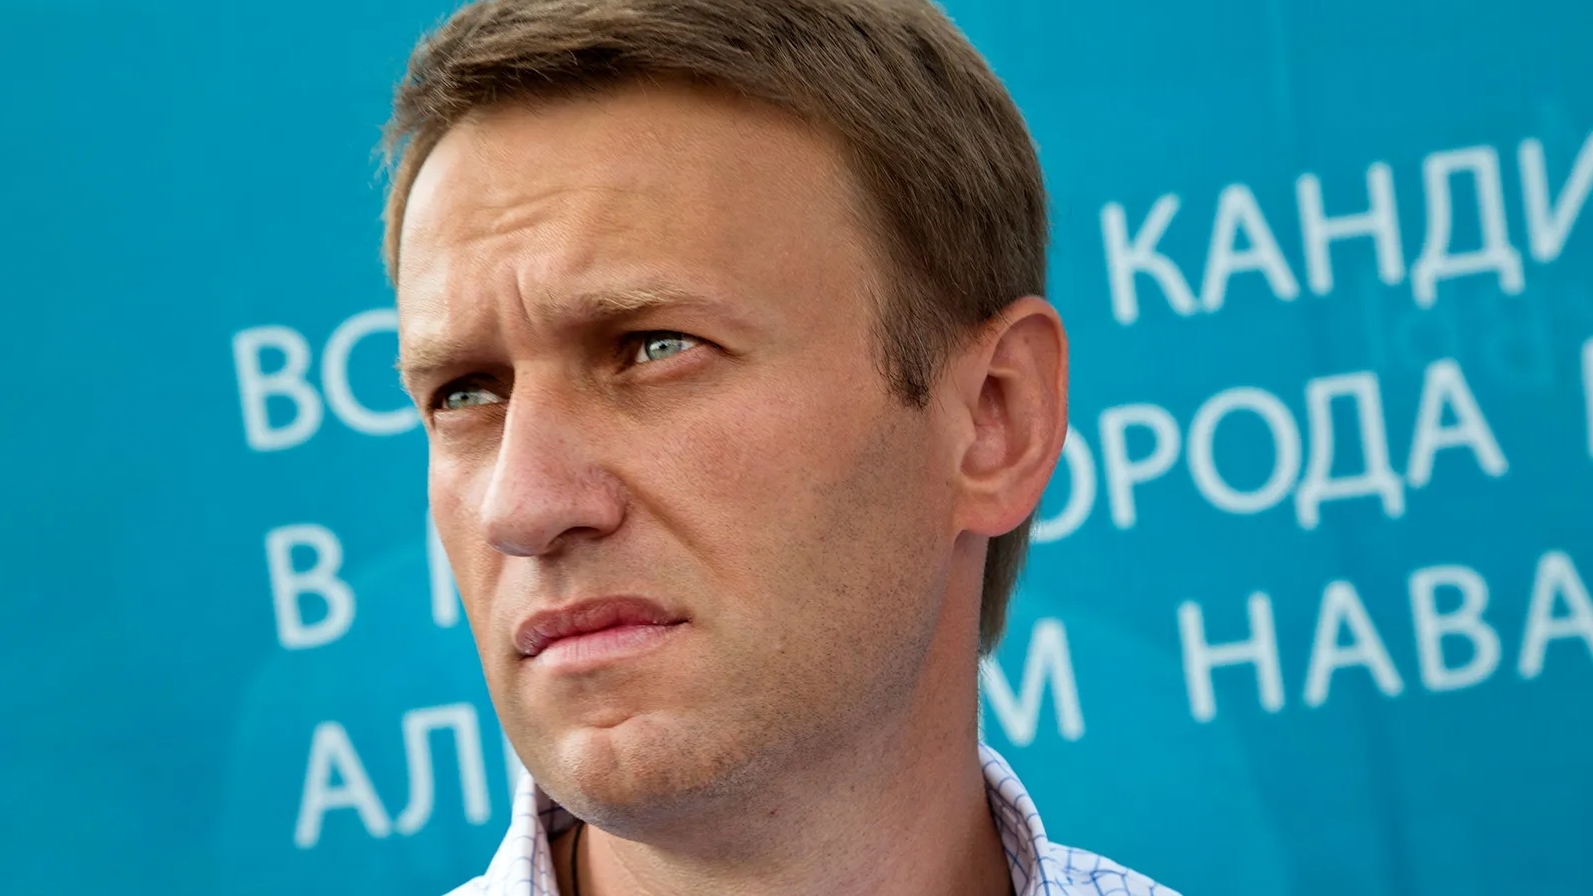 The US imposed sanctions on four FSB agents involved in the poisoning of Navalny